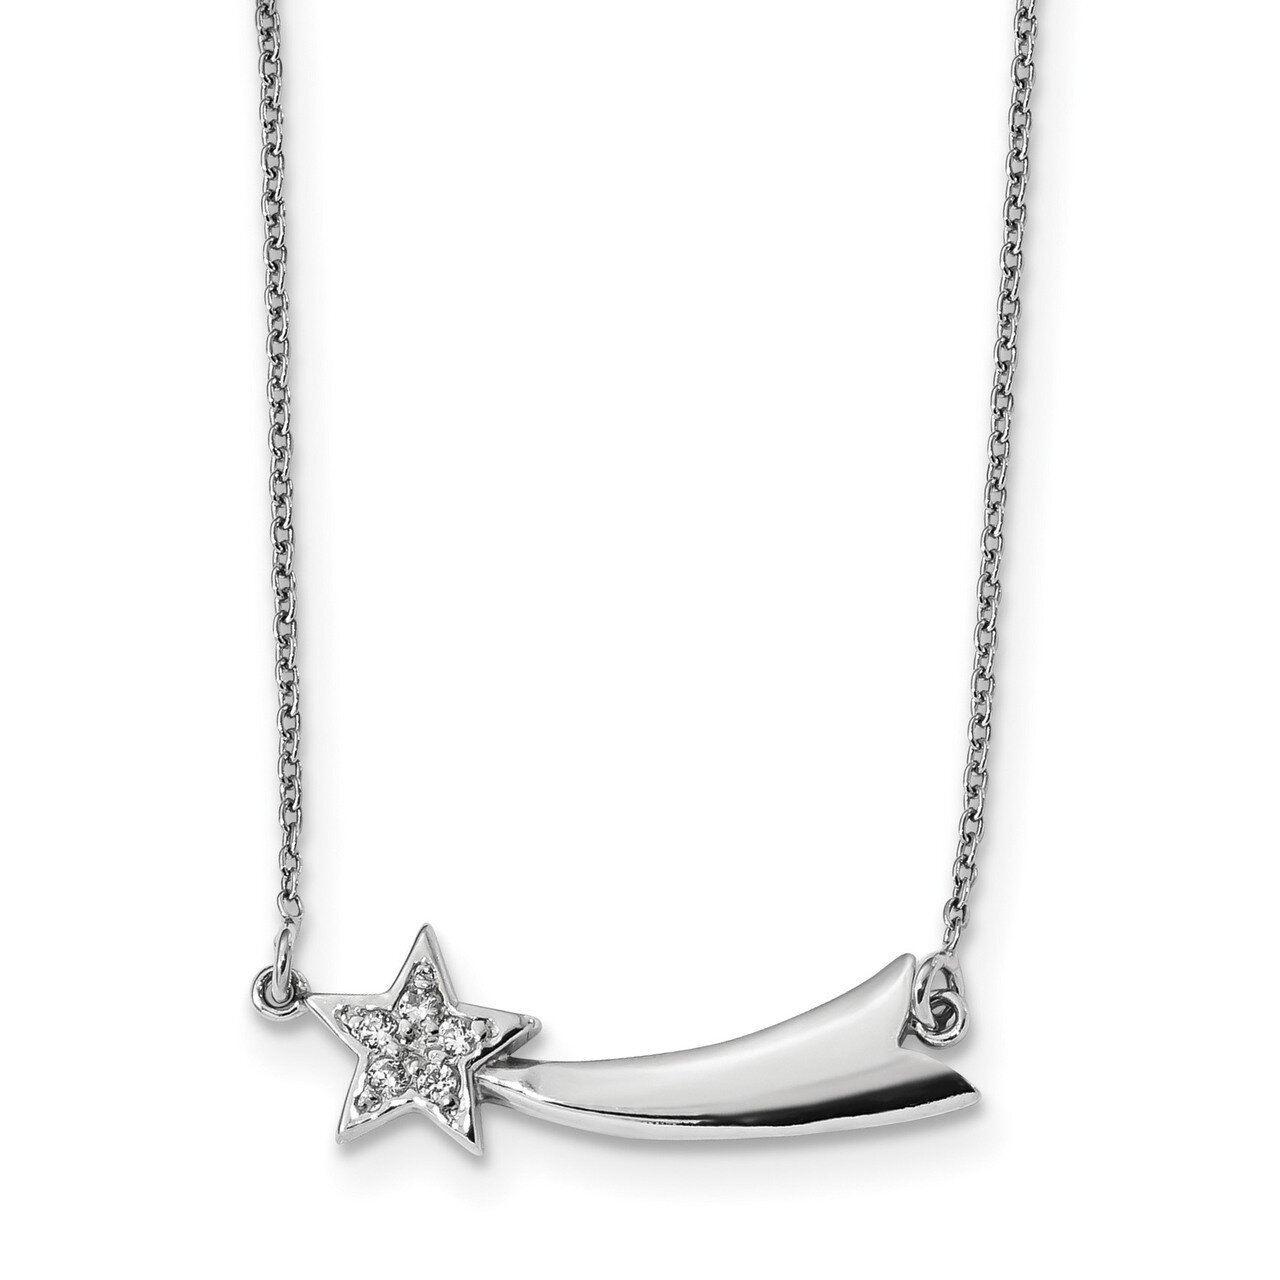 CZ Diamond Shooting Star with 2 inch Extender Necklace 16 Inch Sterling Silver Rhodium-plated QG4437-16